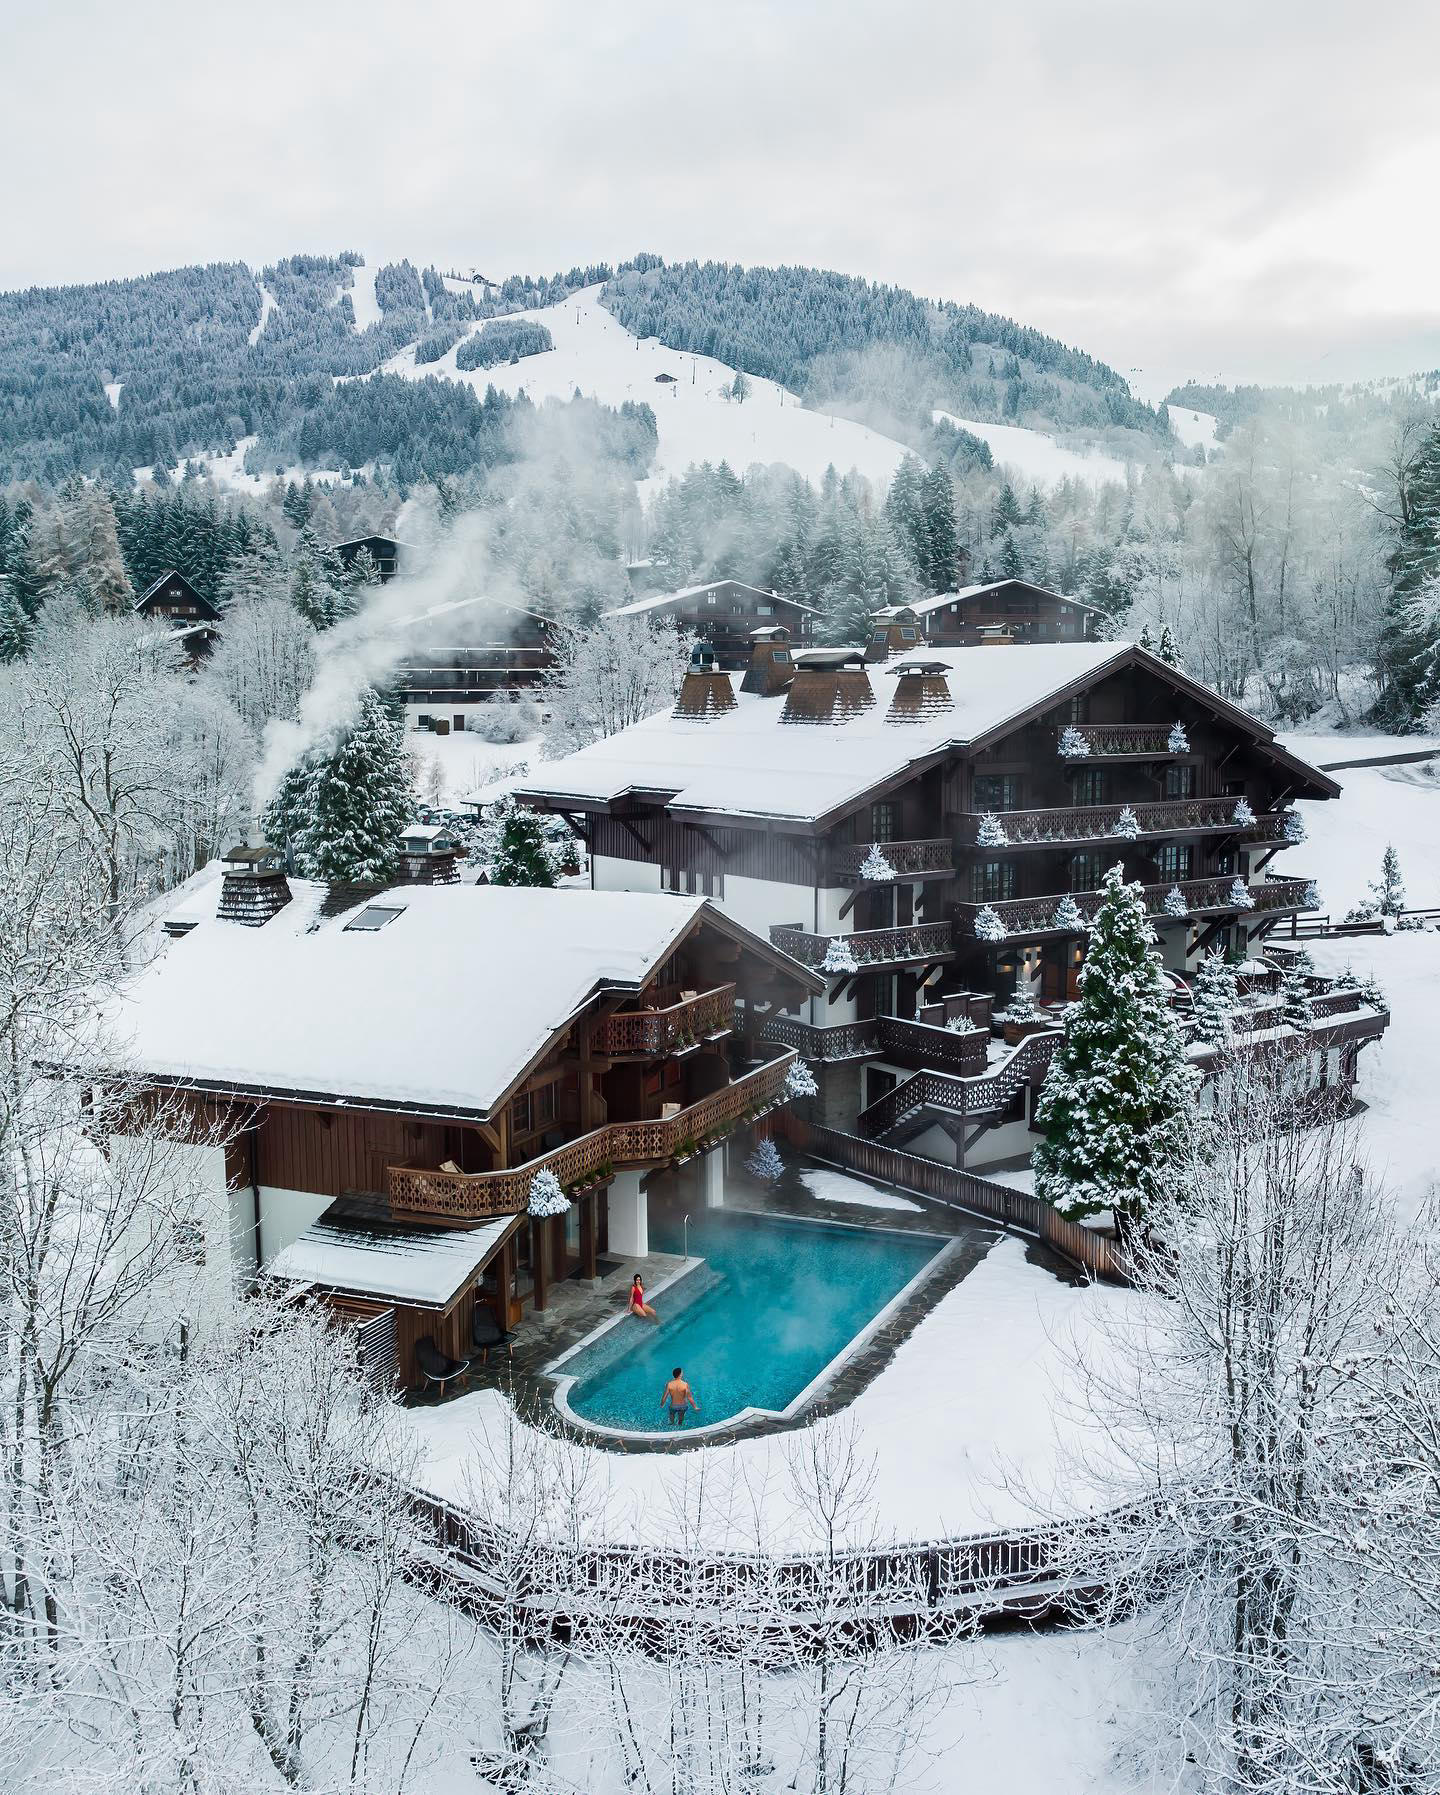 JEREMY AUSTIN - Living a winter dream in our authentic Alpine chalet at #fsmegeve